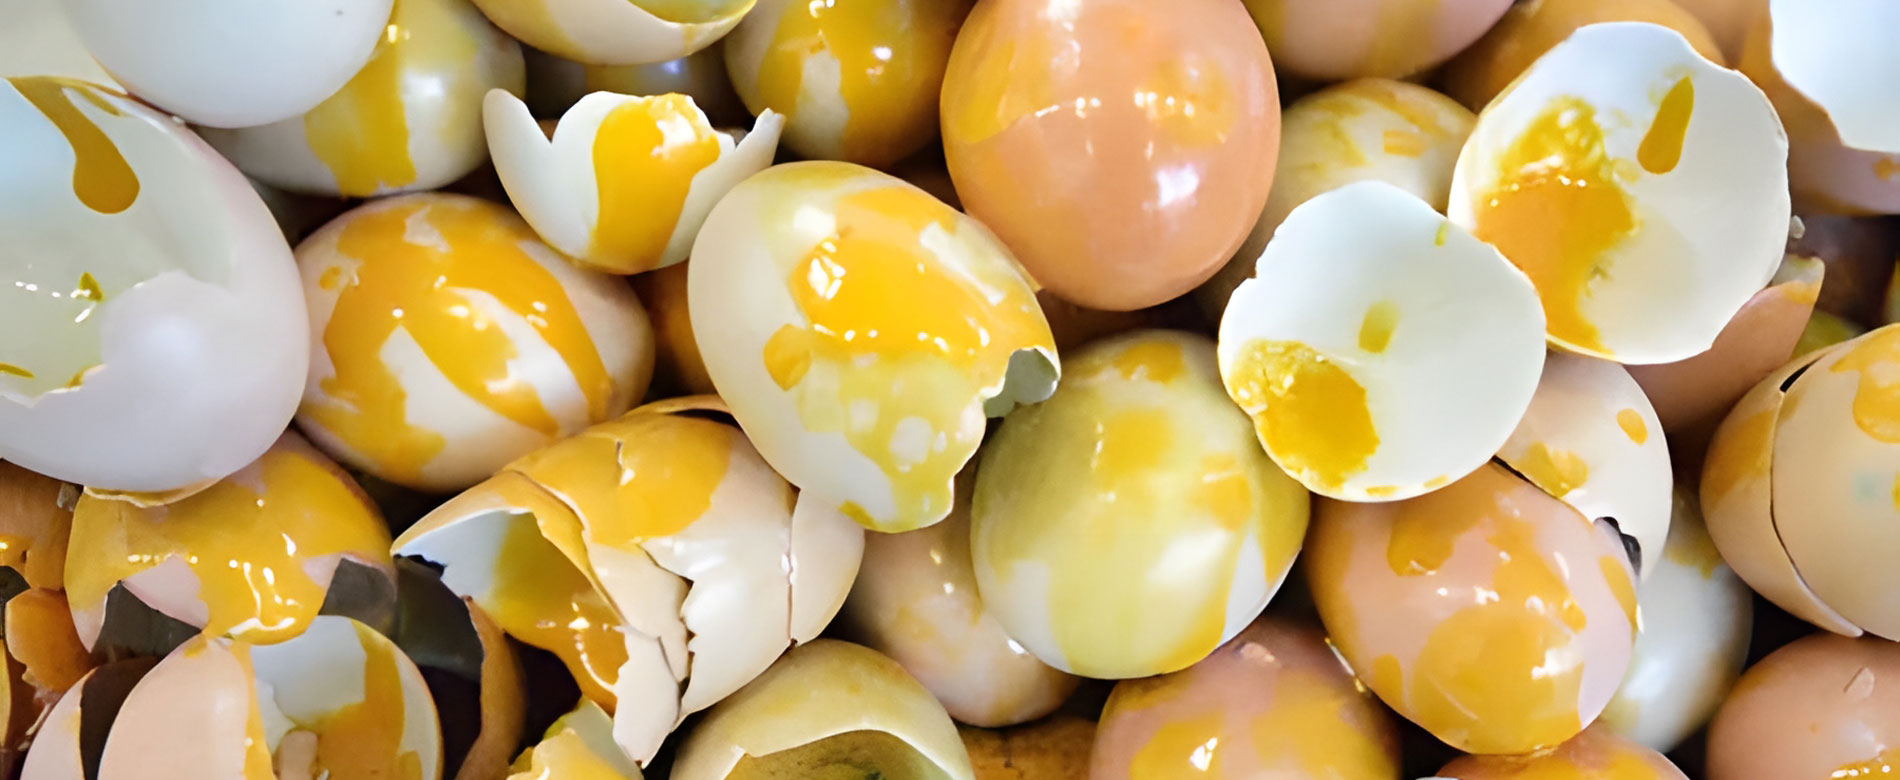 Why do Rotten Eggs Smell Like Sulfur?